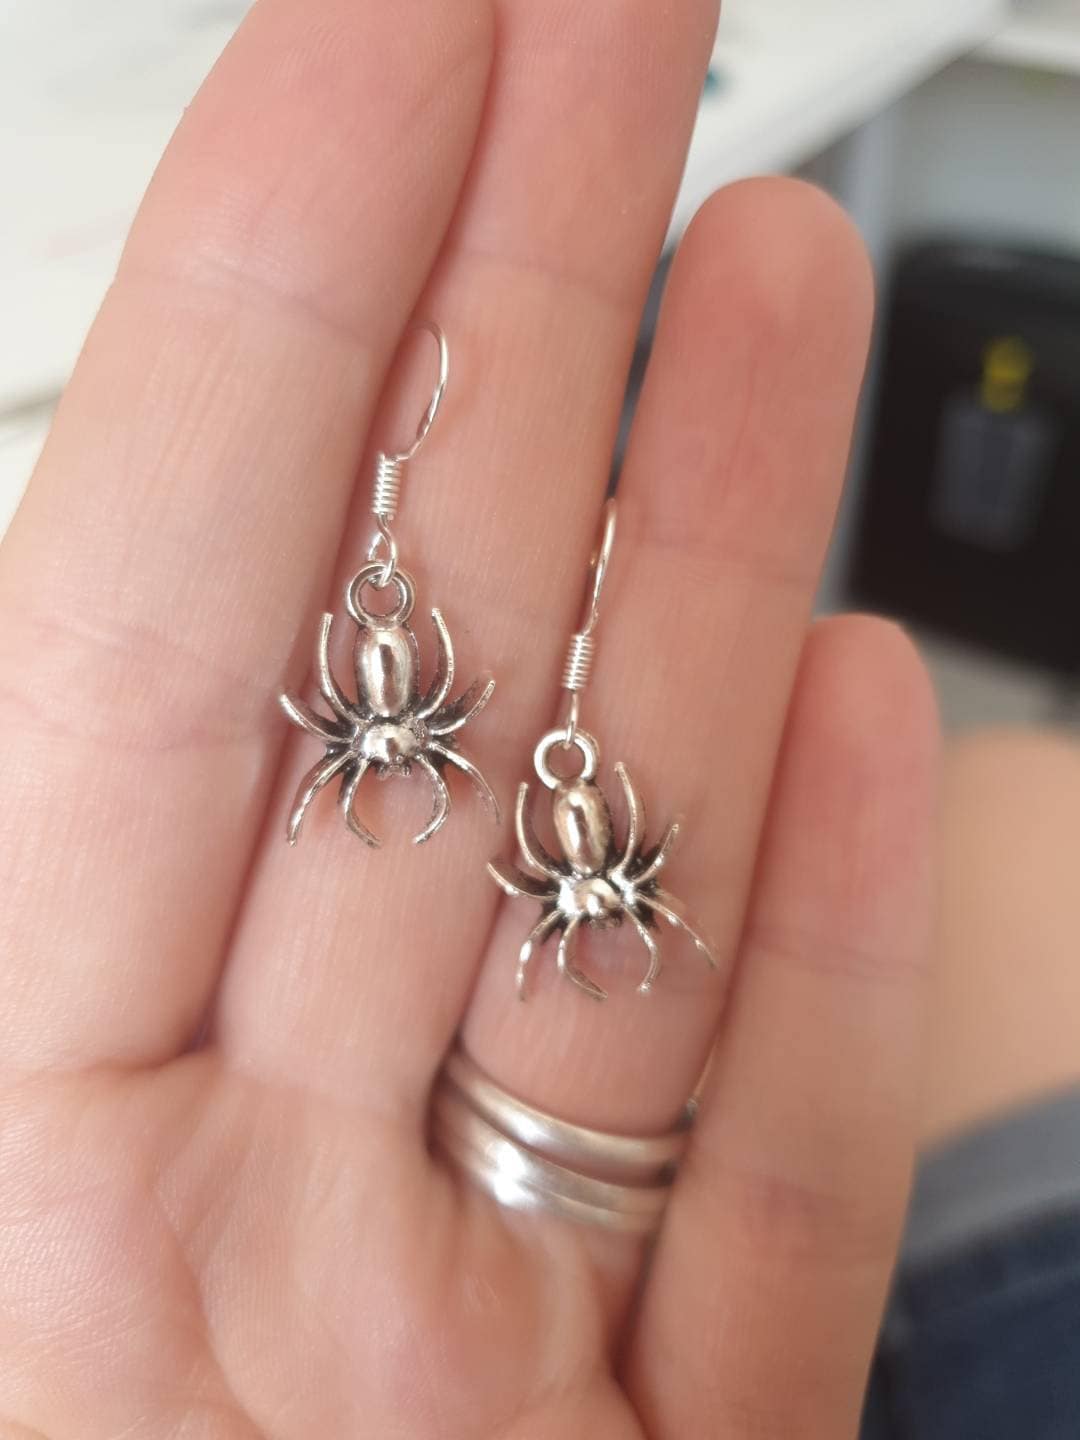 Handmade Antique Silver Spider Dangly, Charm Earrings In Gift Bag Perfect For Halloween - Premium  from Etsy - Just £4.99! Shop now at Uniquely Holt